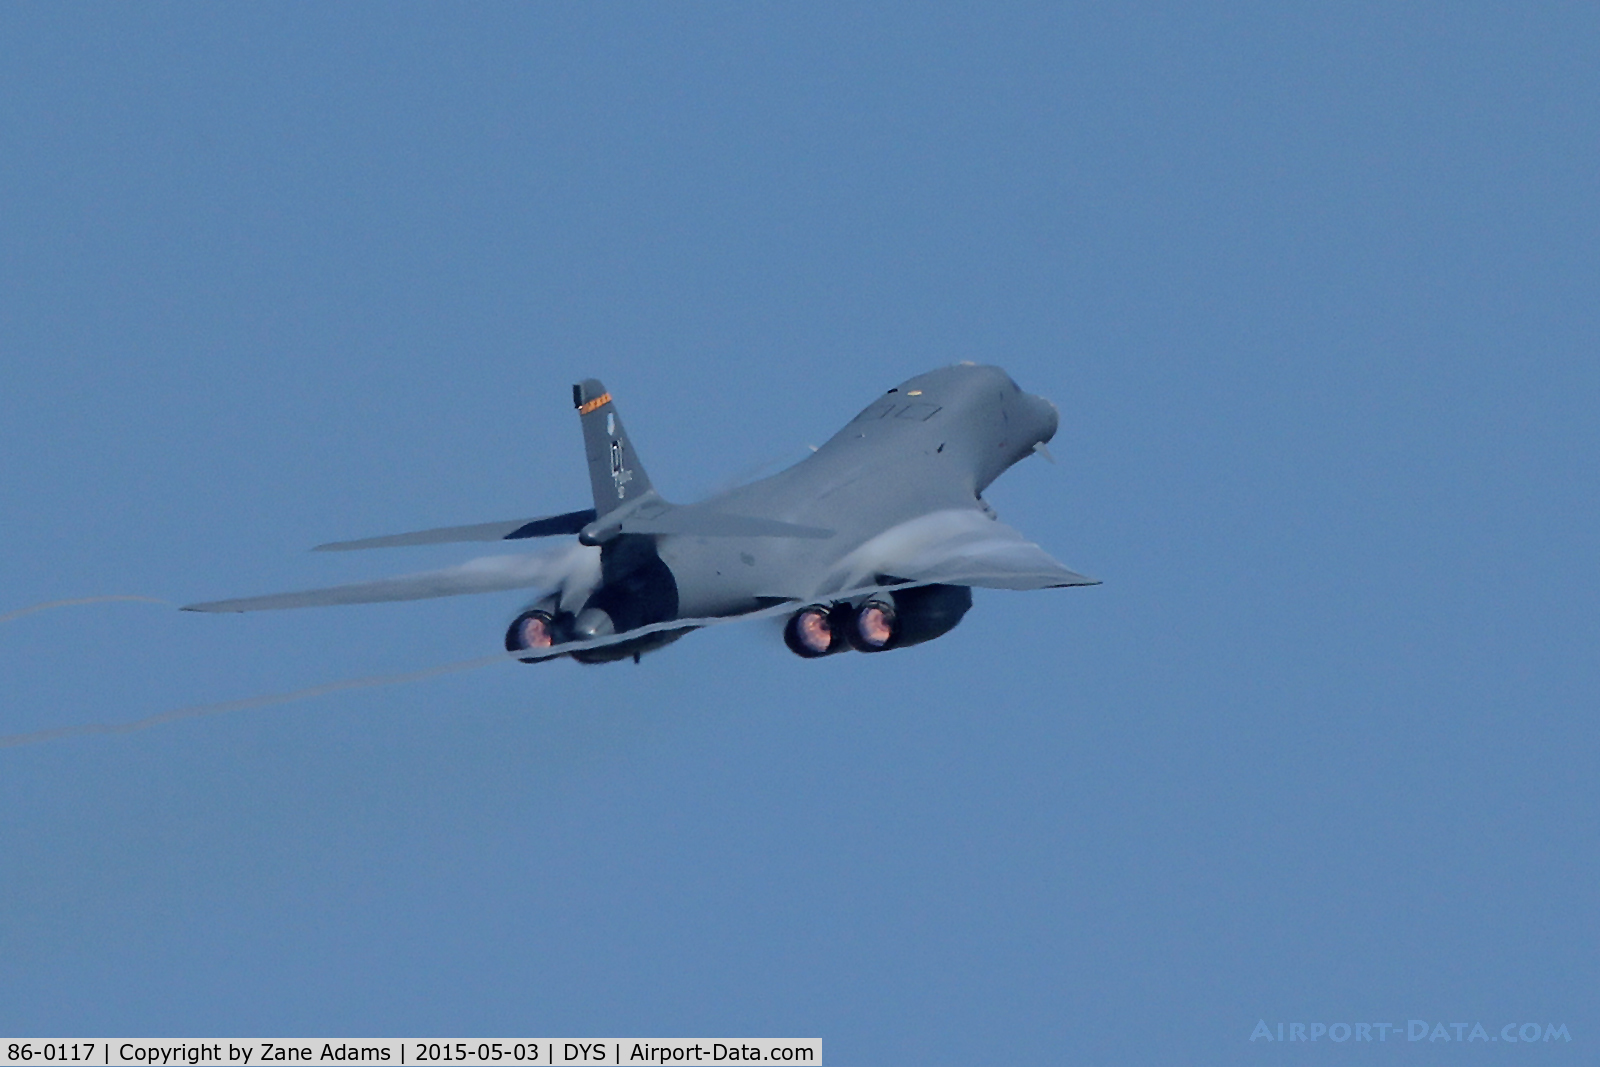 86-0117, 1986 Rockwell B-1B Lancer C/N 77, At the 2015 Big Country Airshow - Dyess AFB, Texas